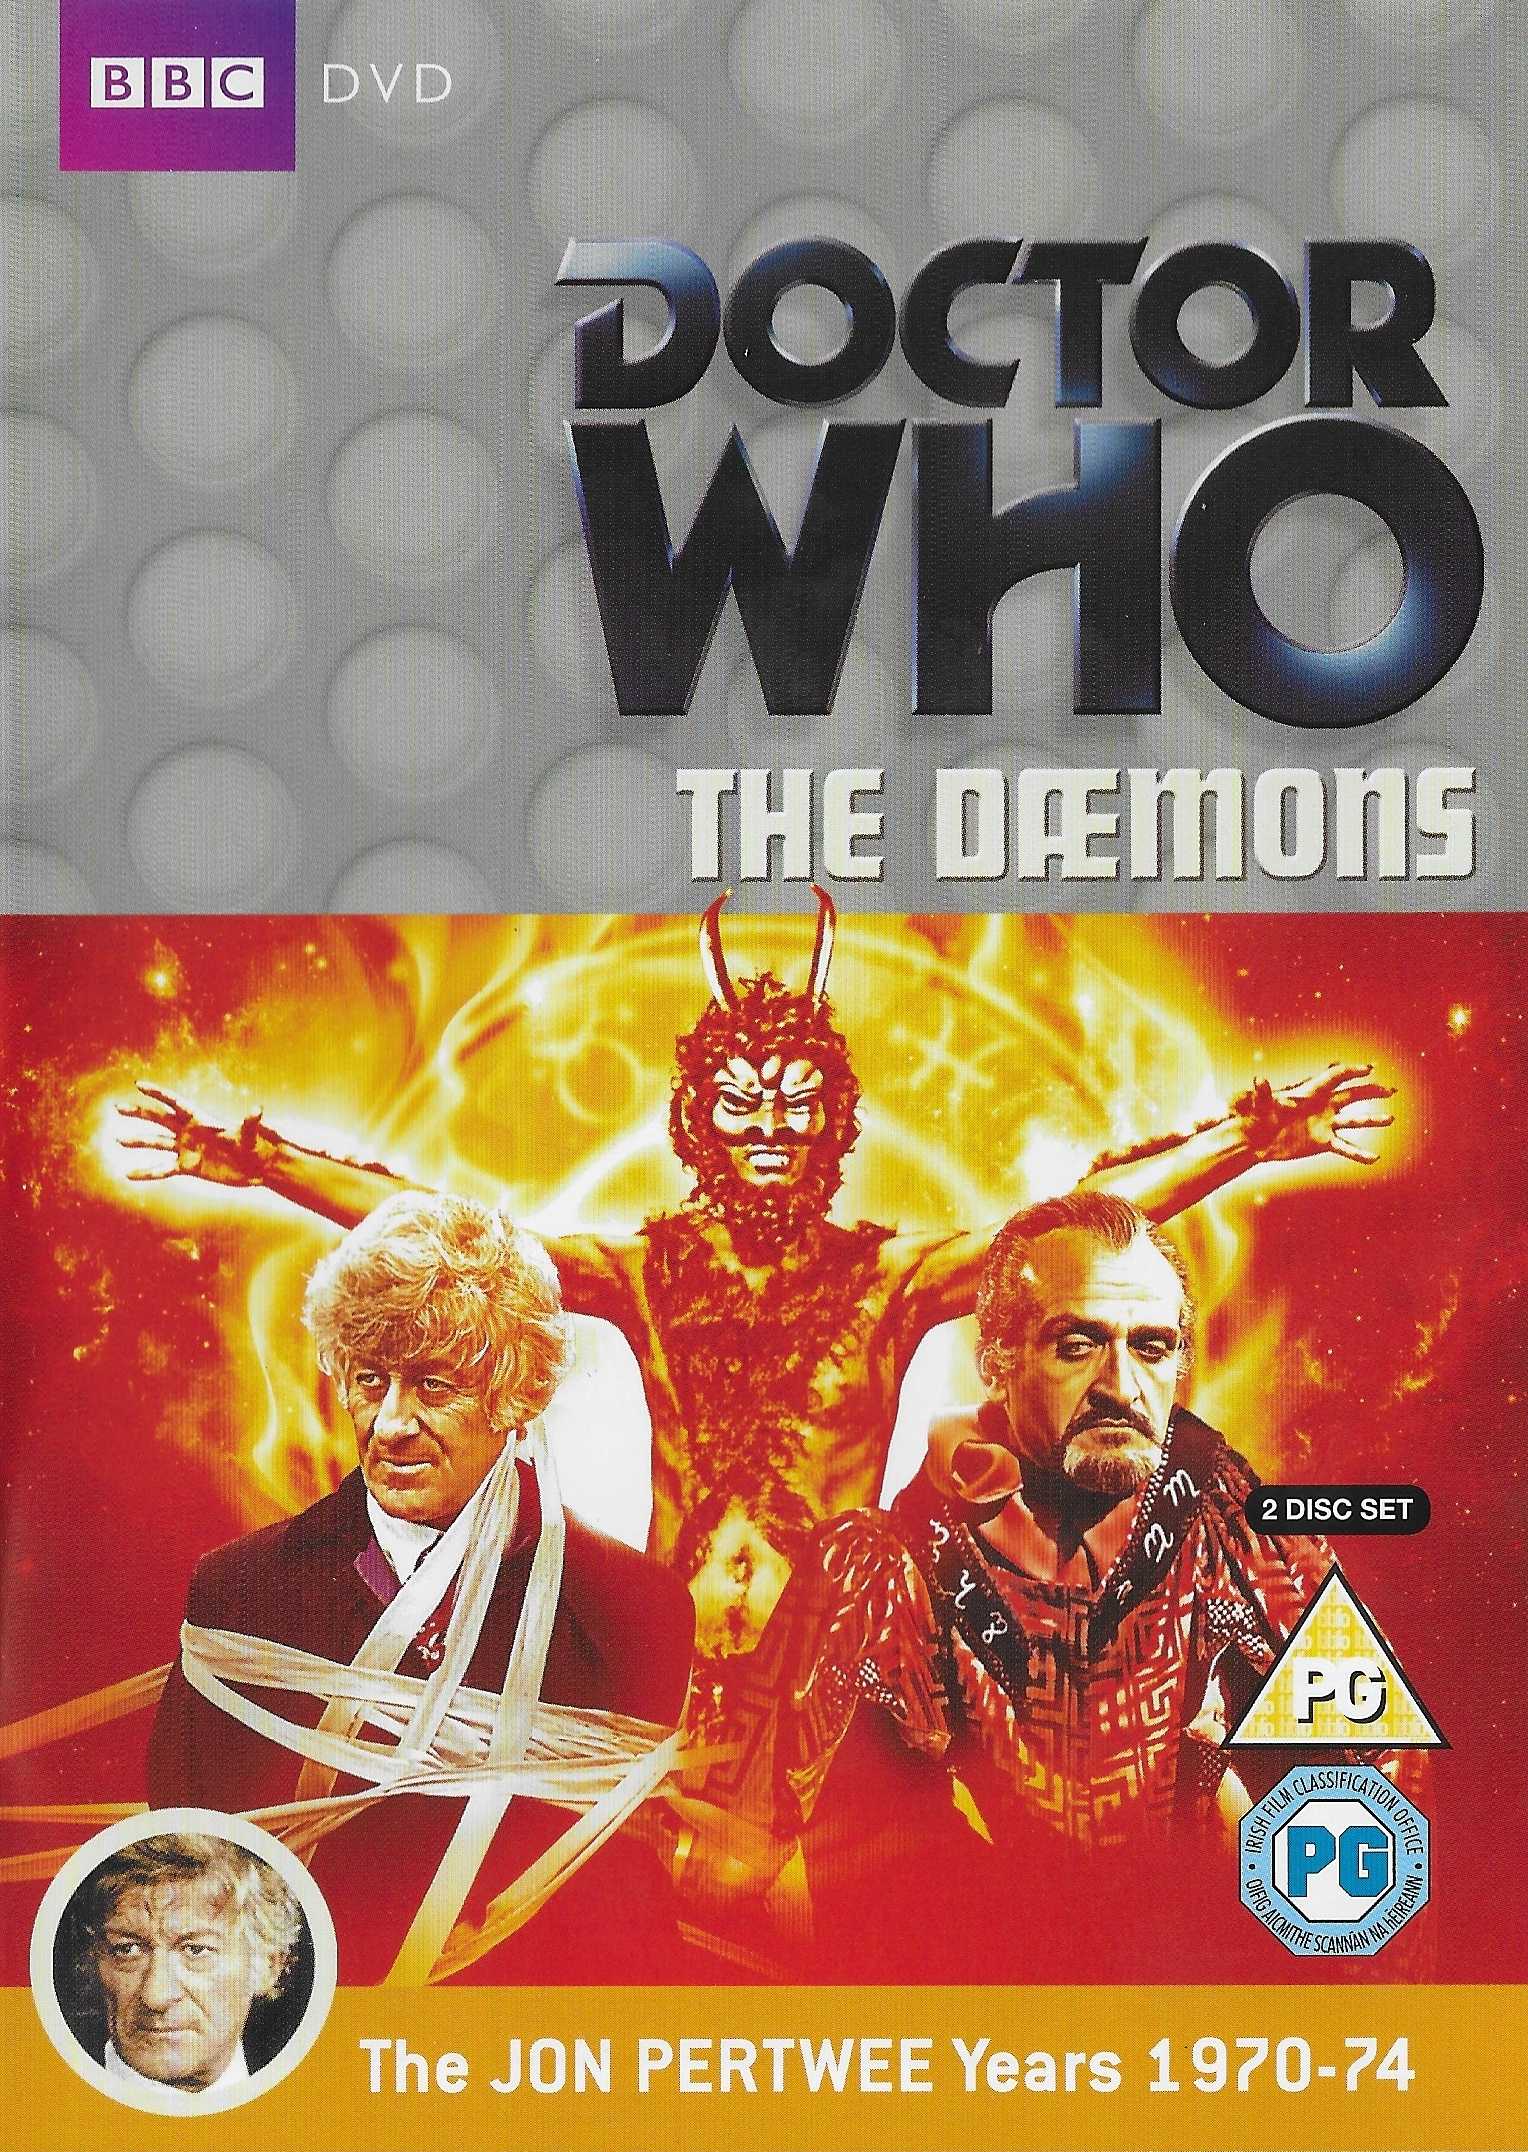 Picture of BBCDVD 3383 Doctor Who - The Daemons by artist Guy Leopold from the BBC records and Tapes library